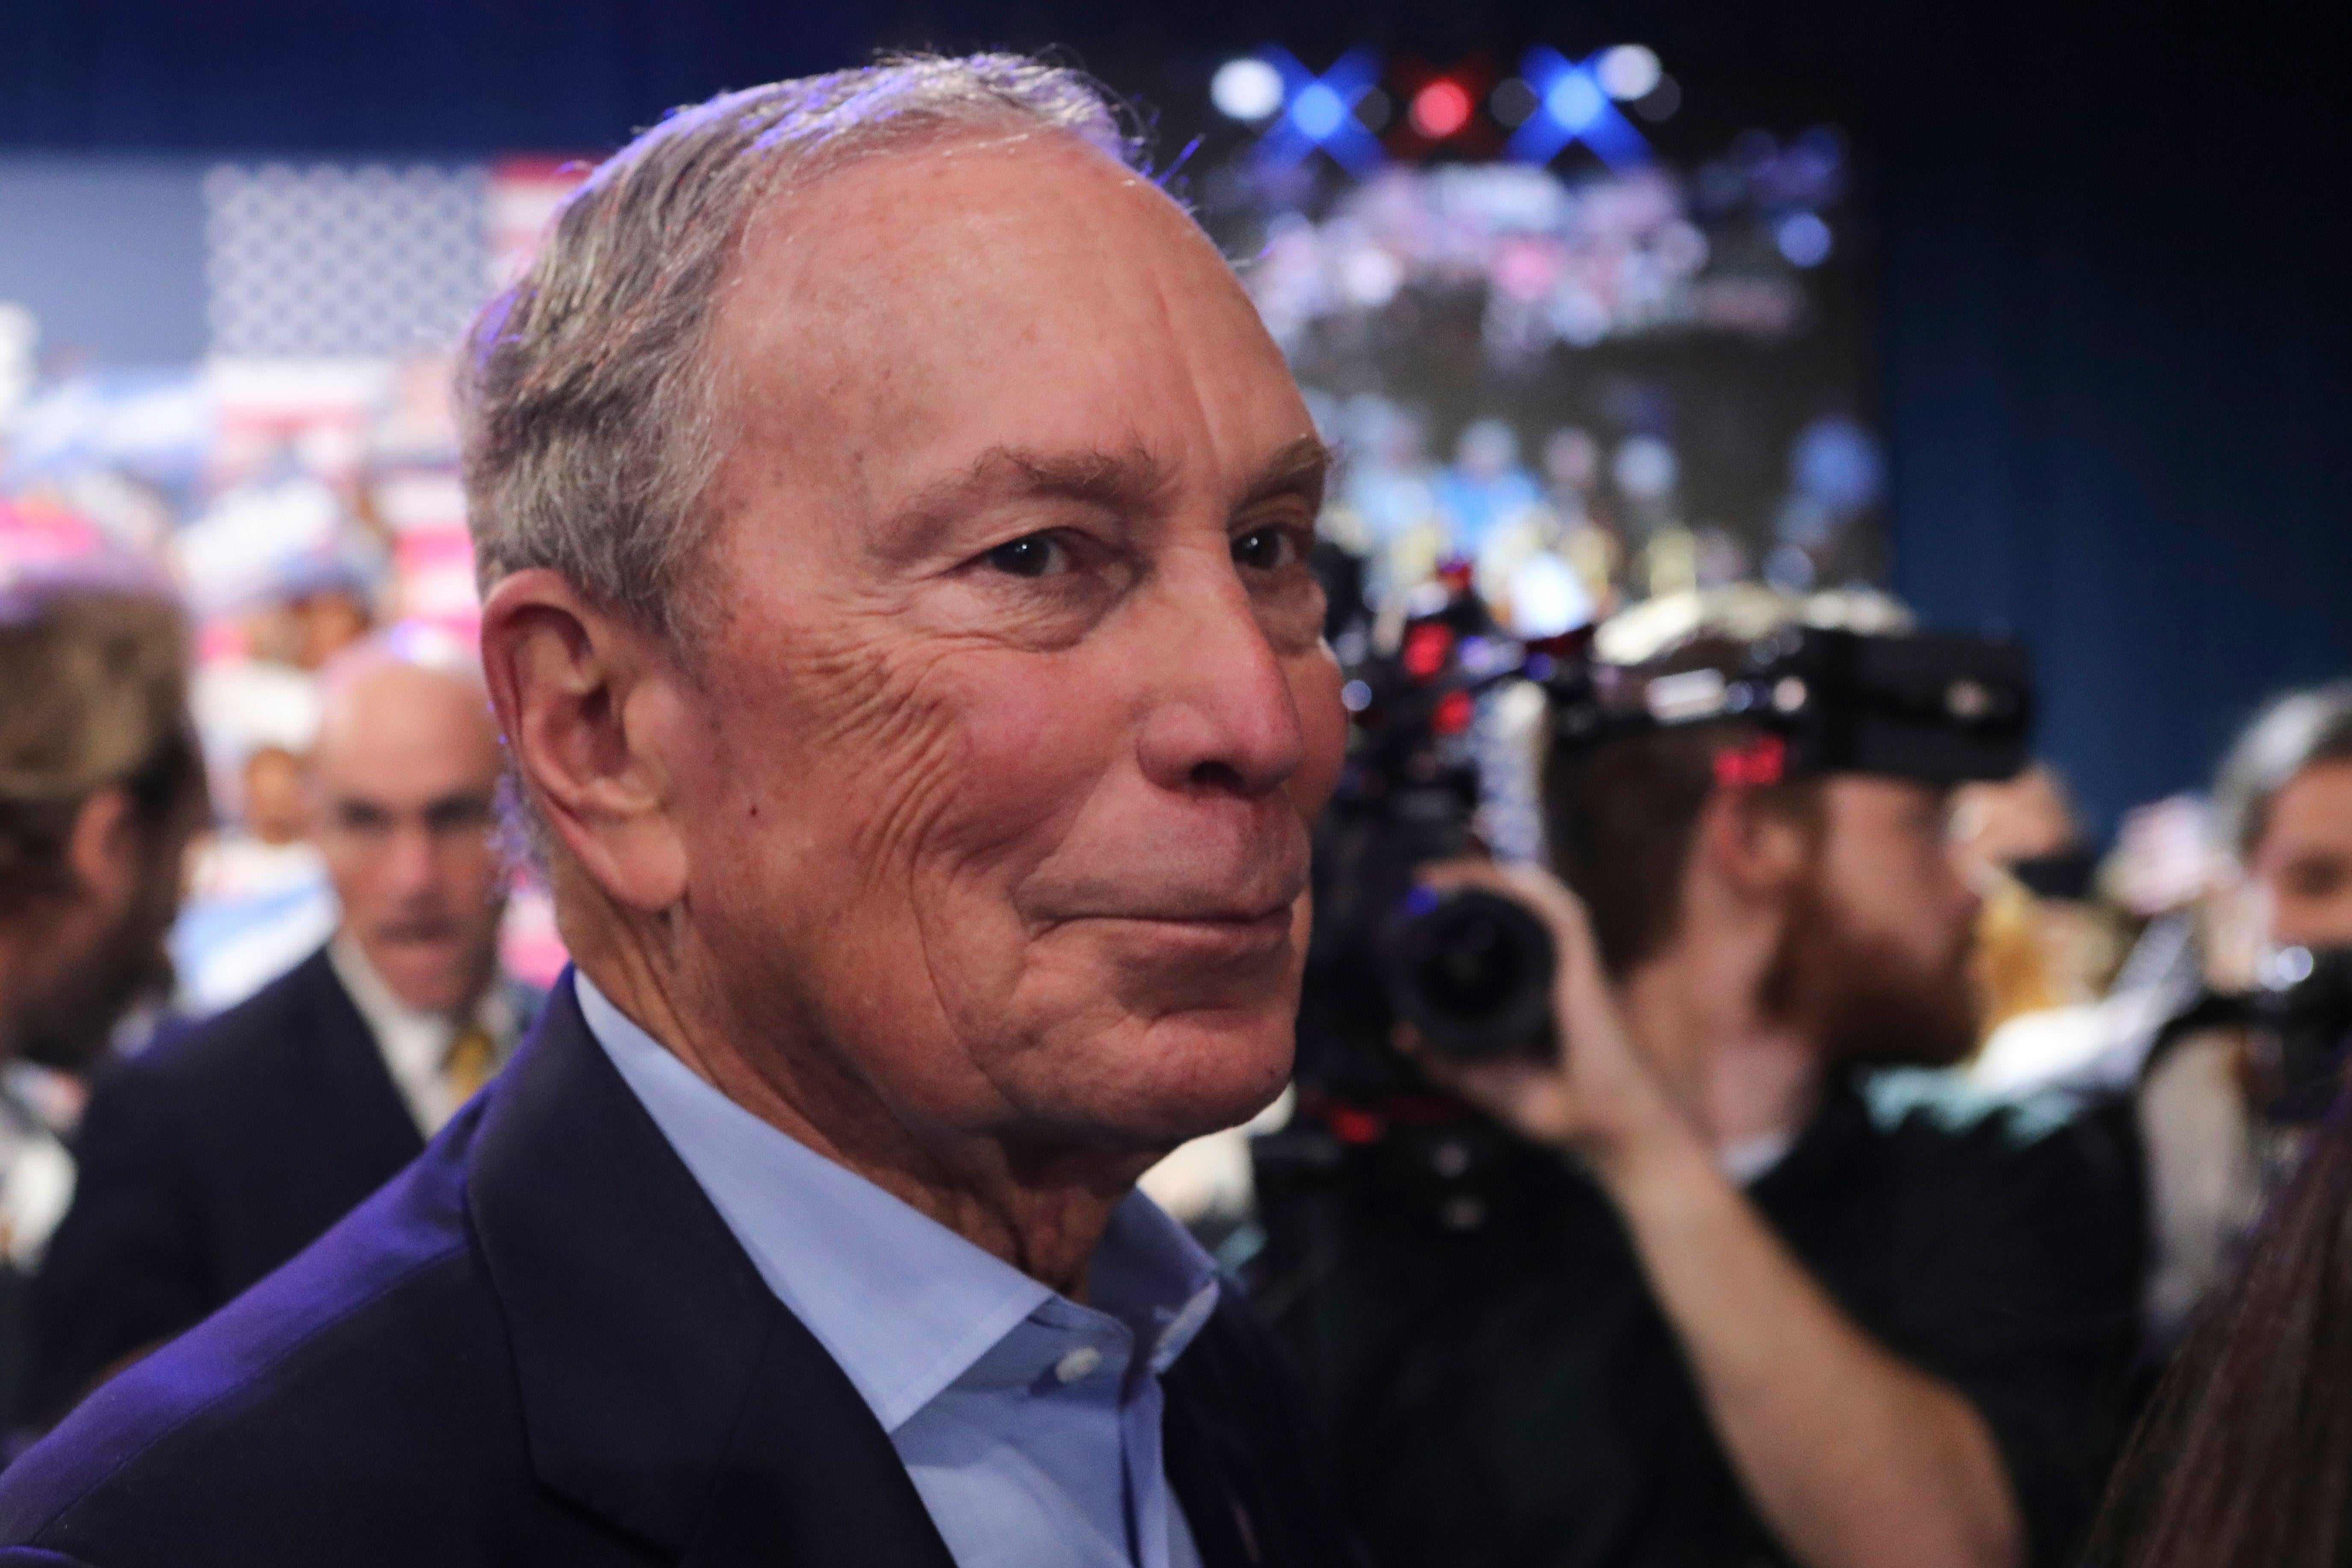 Mike Bloomberg is about to more influential than ever before.